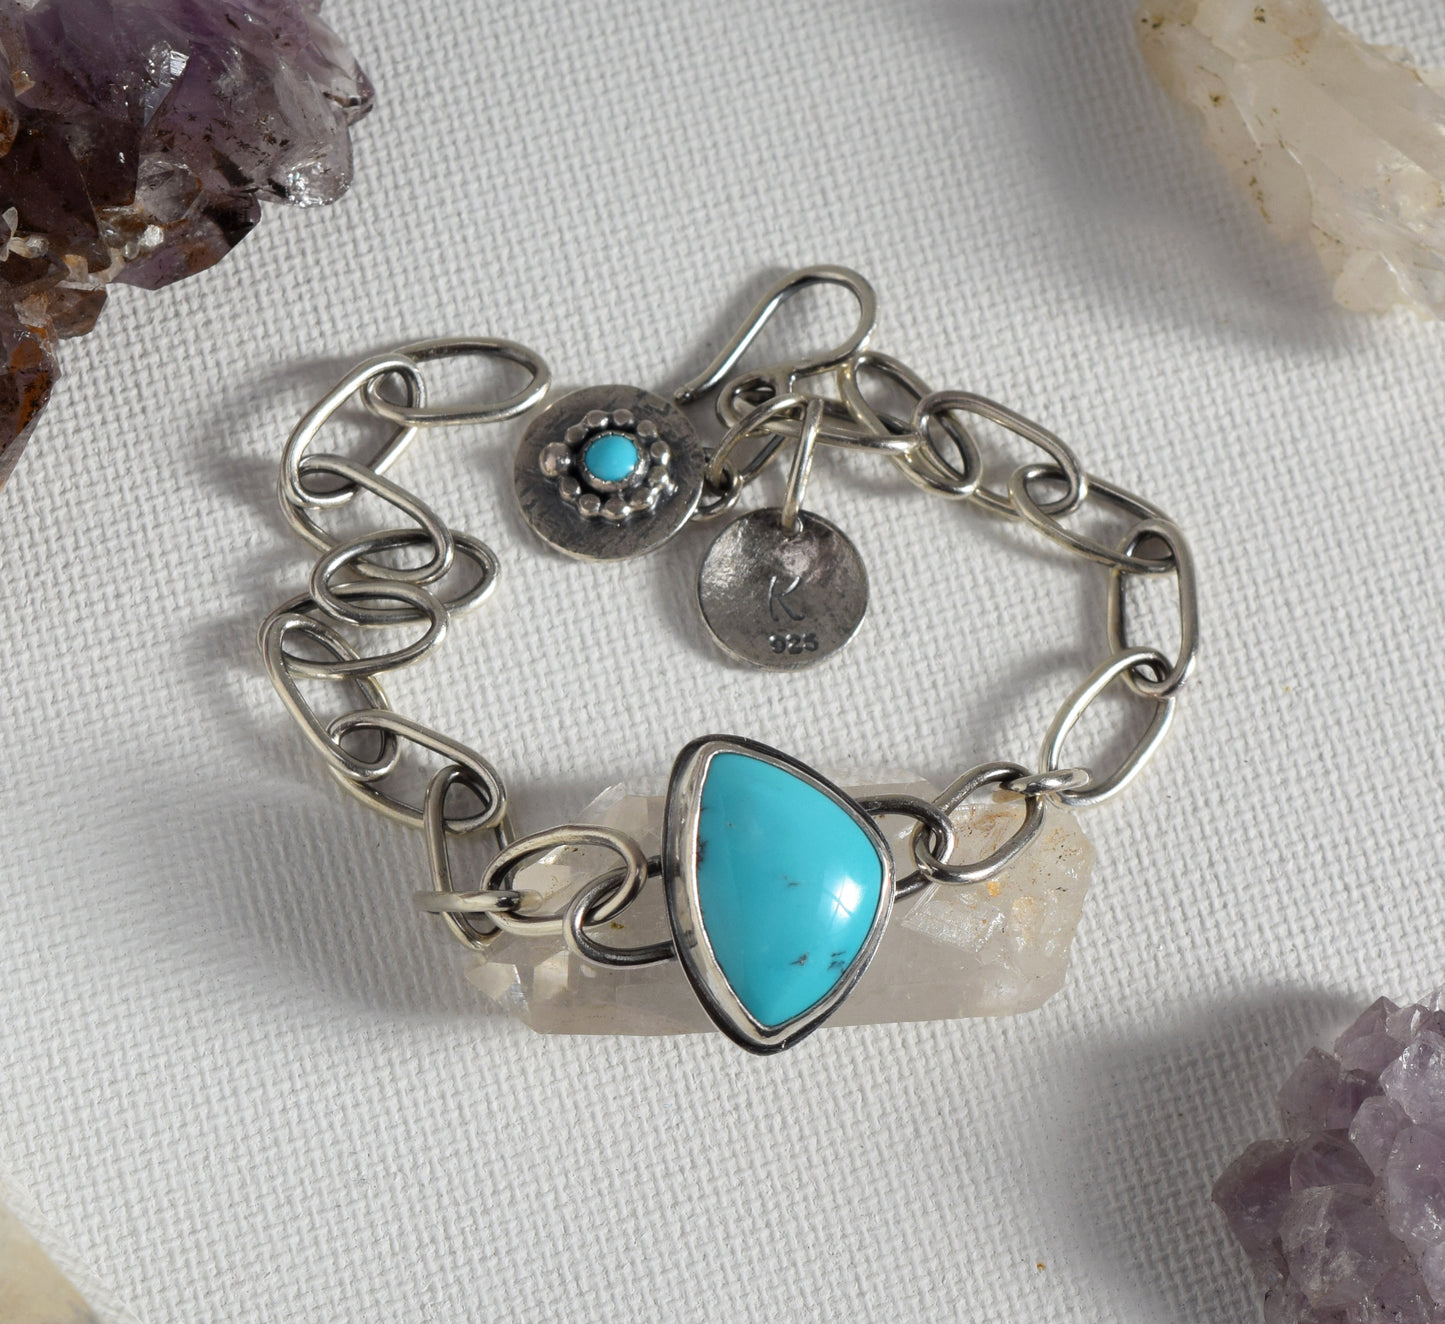 Artisan Made Cloud Mountain Turquoise & Sterling Silver Bracelet with Handmade Link Chain and Charms